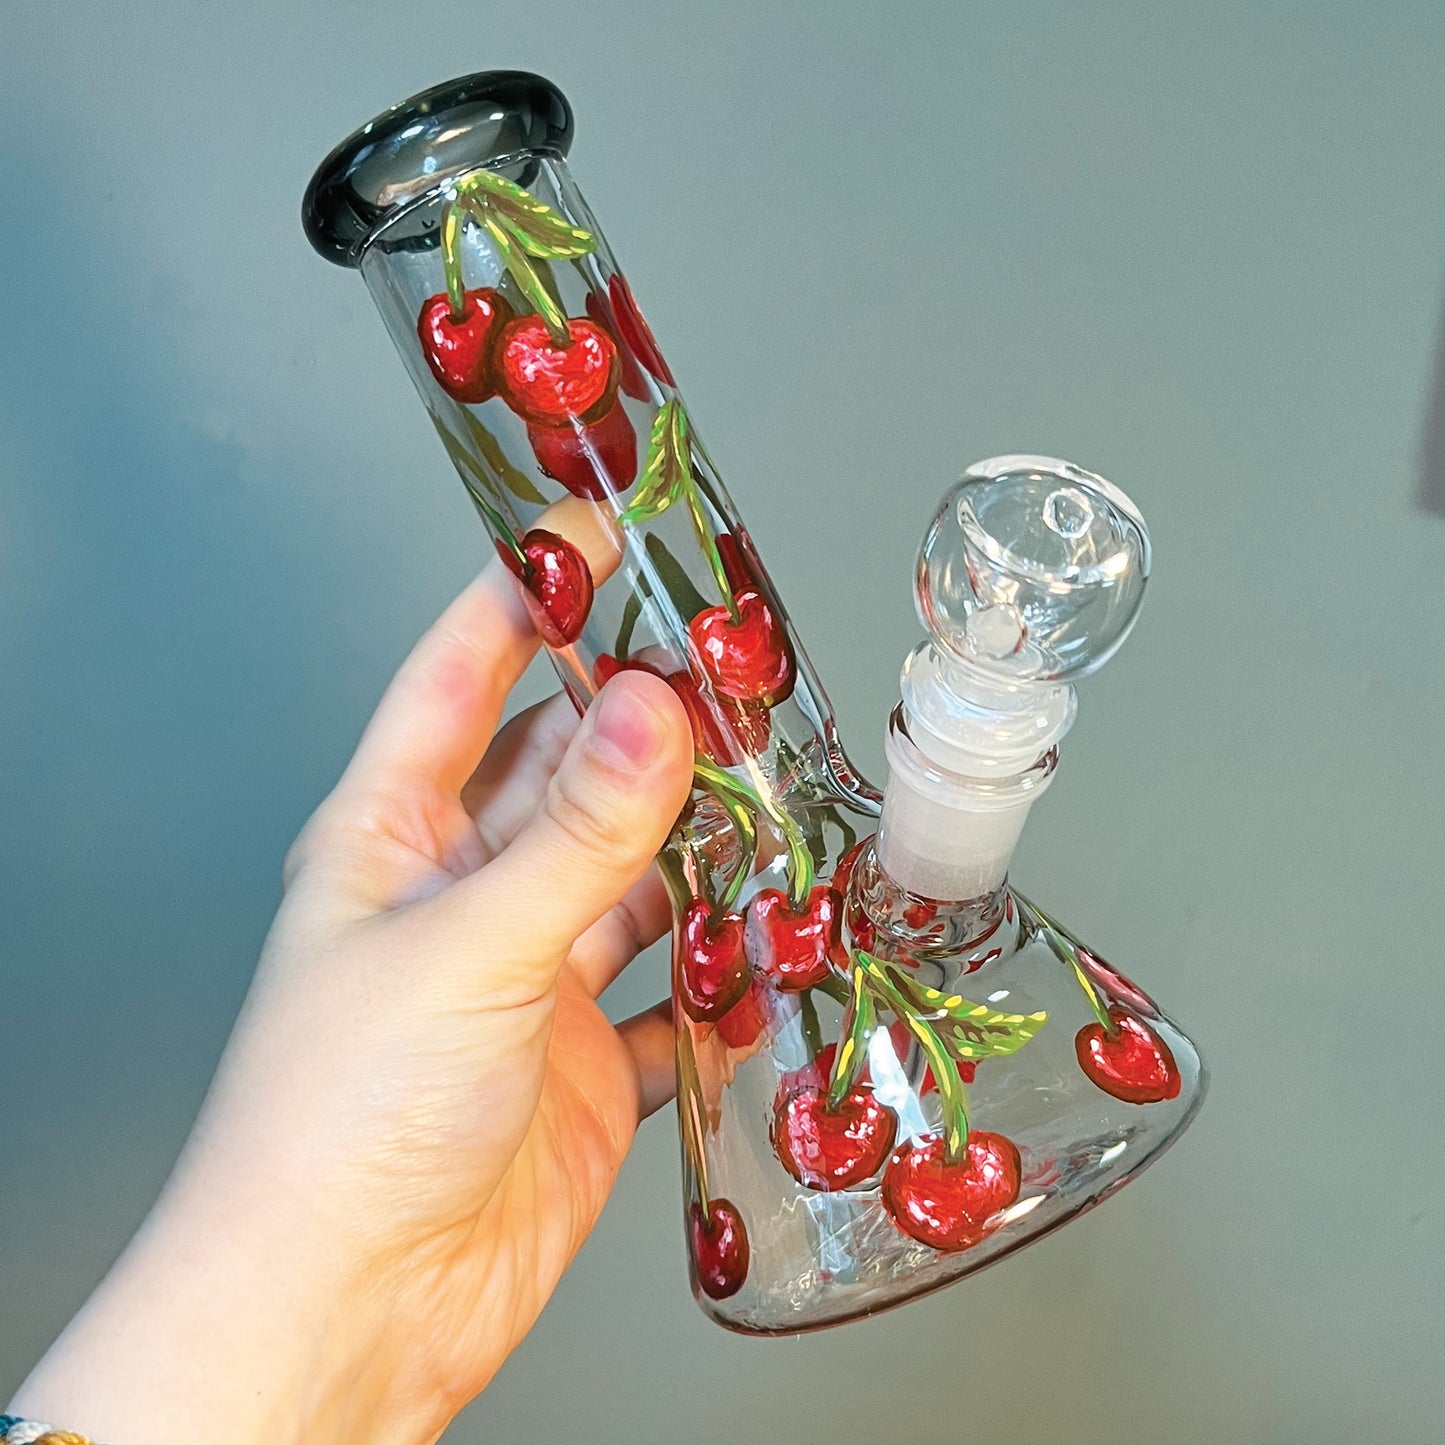 Same bong as before but being held by a hand